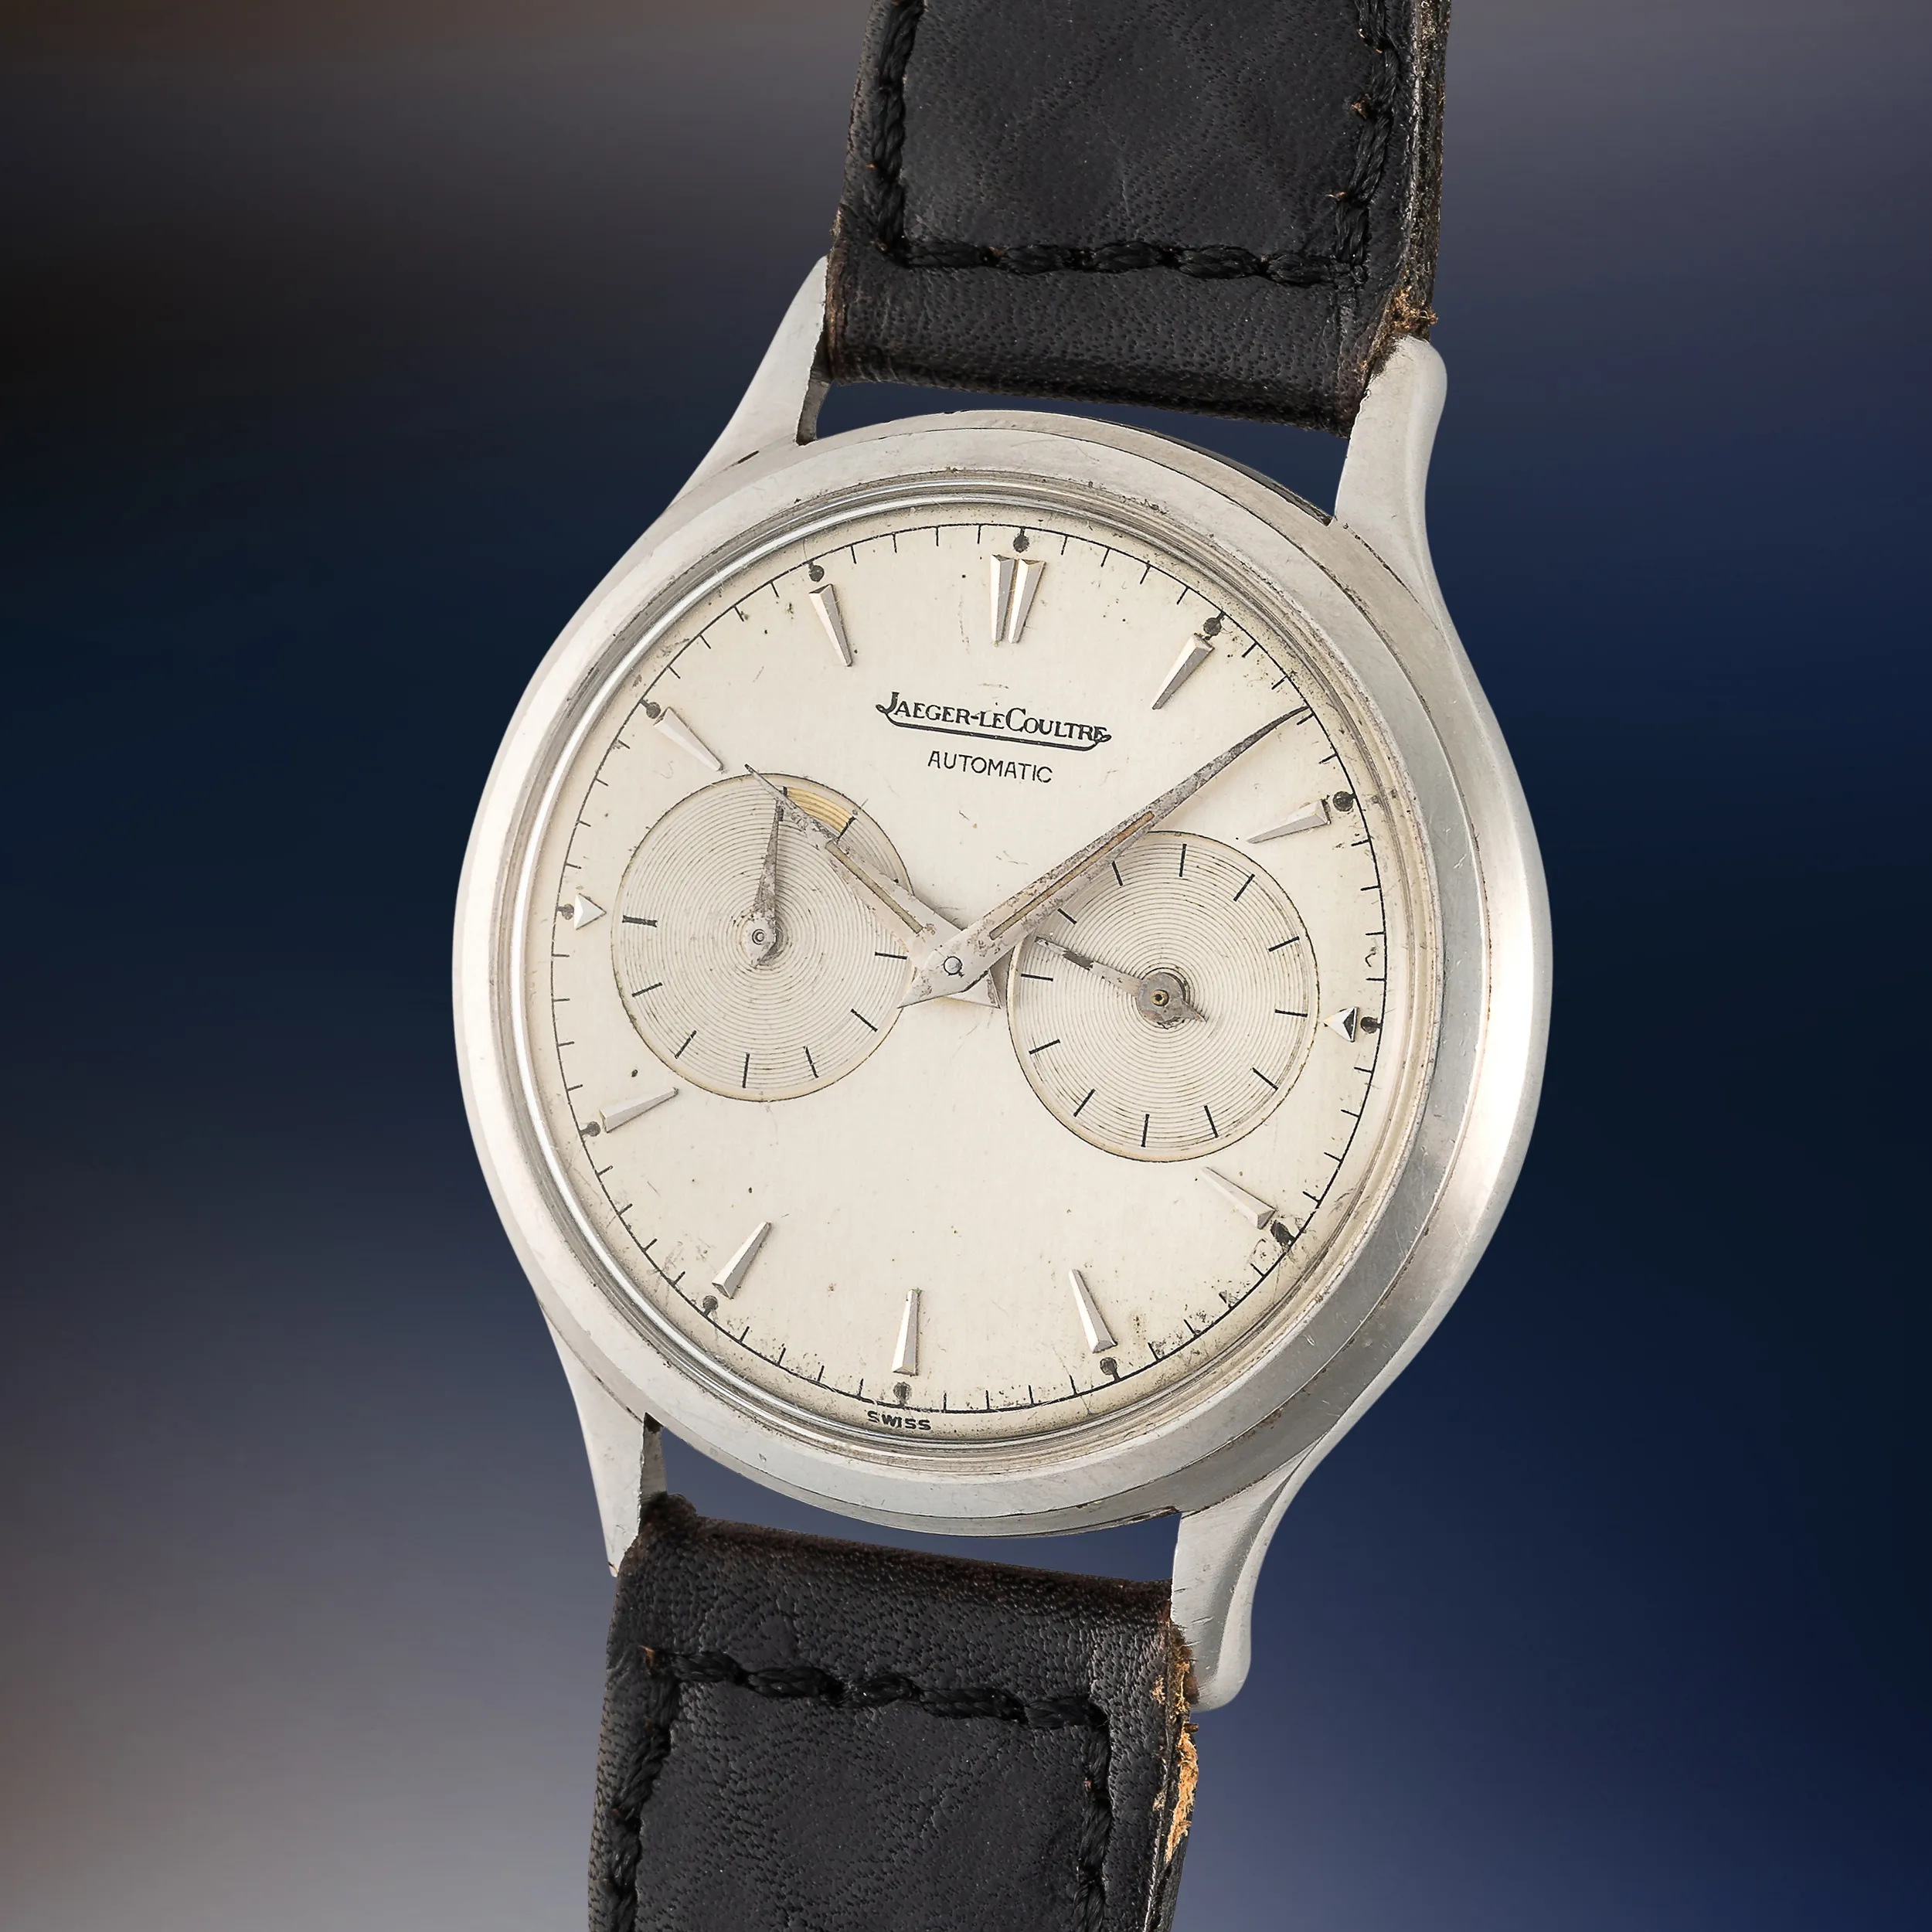 Jaeger-LeCoultre Futurematic E501 37mm Stainless steel